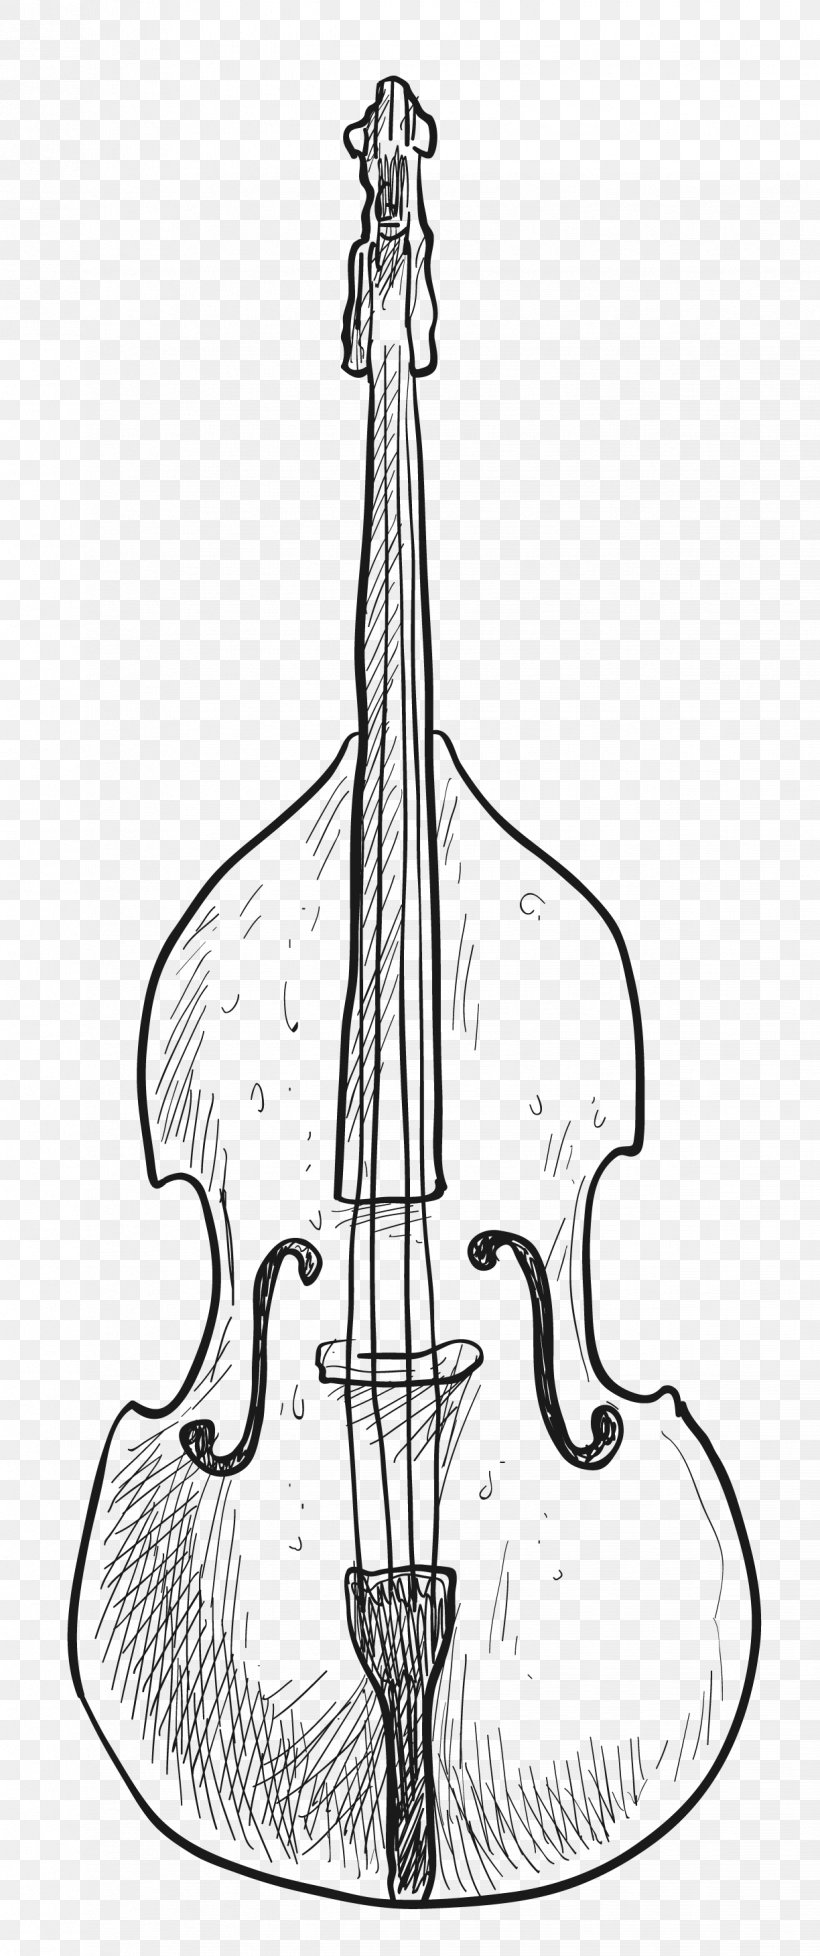 Cartoon man playing music on big double bass or cello - isolated street  musician | Stock vector | Colourbox